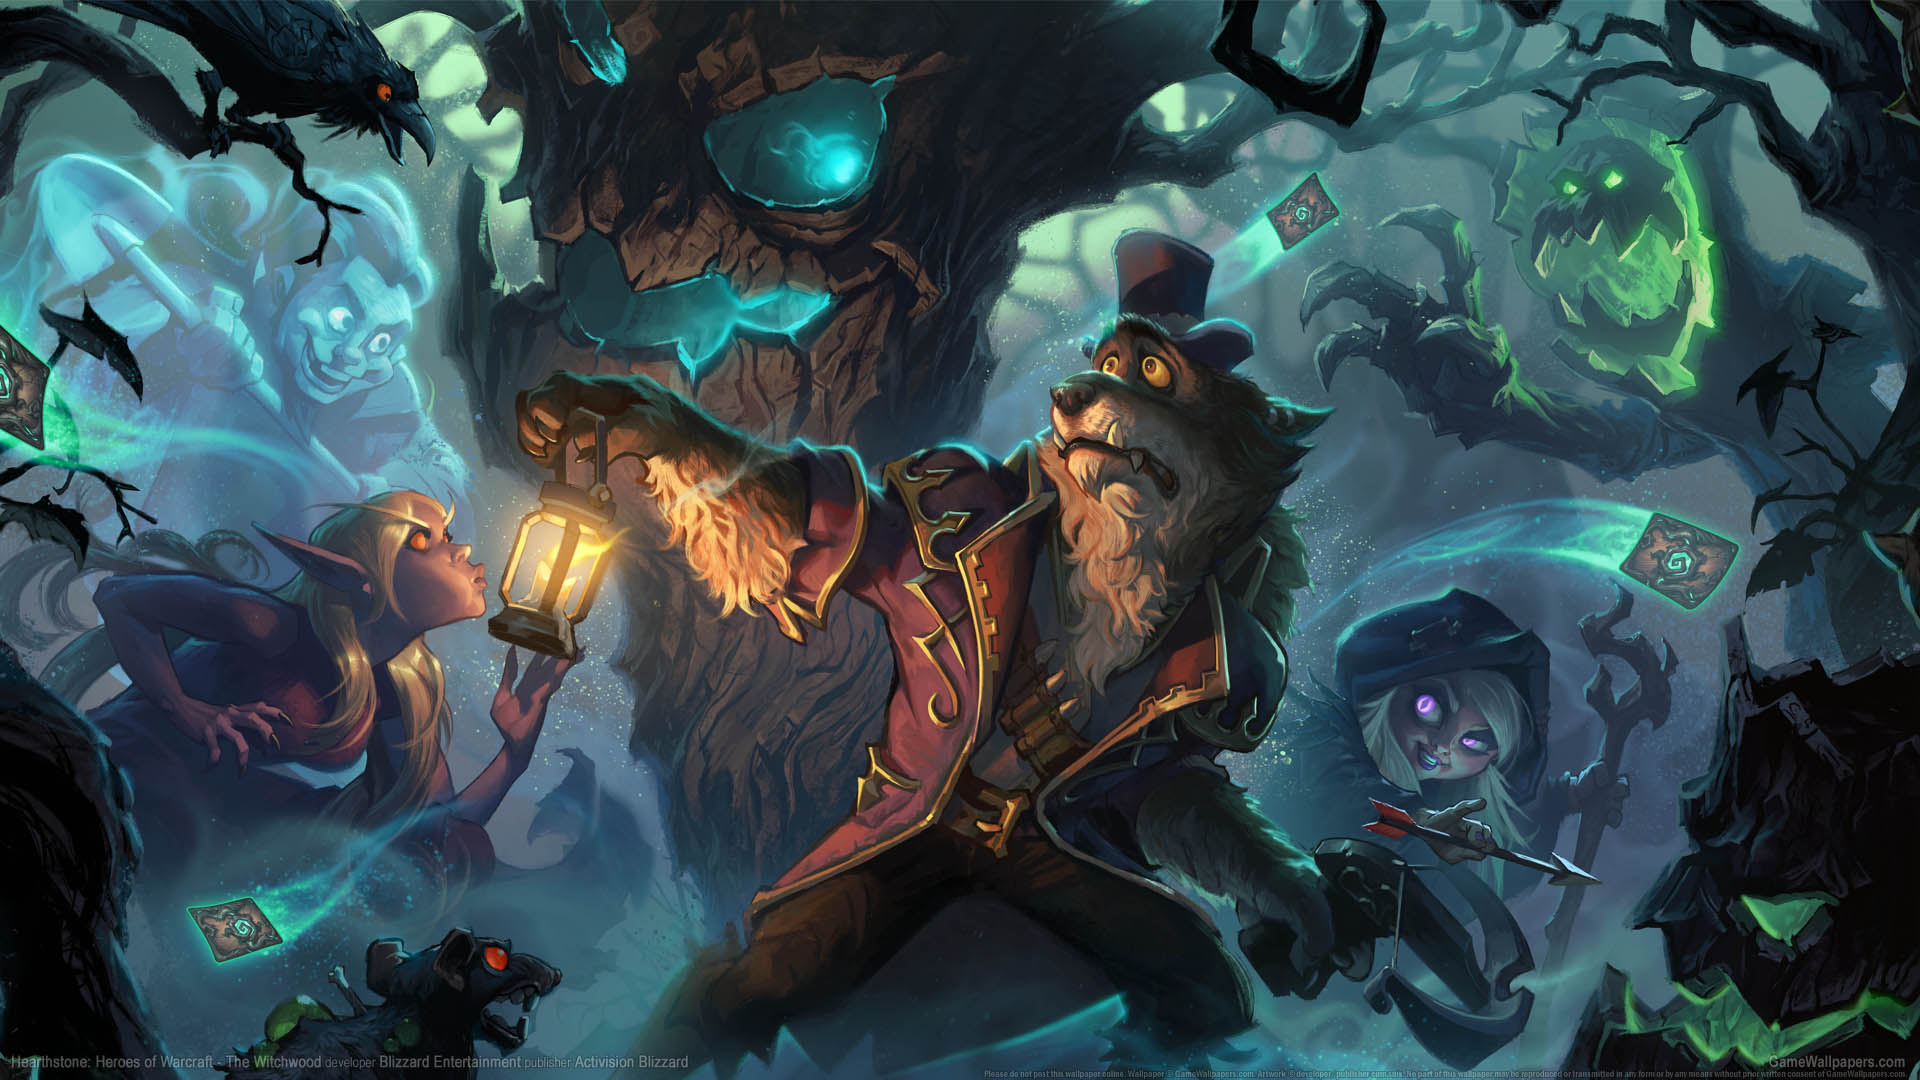 Hearthstone Heroes of Warcraft   The Witchwood wallpaper 01 1920x1080